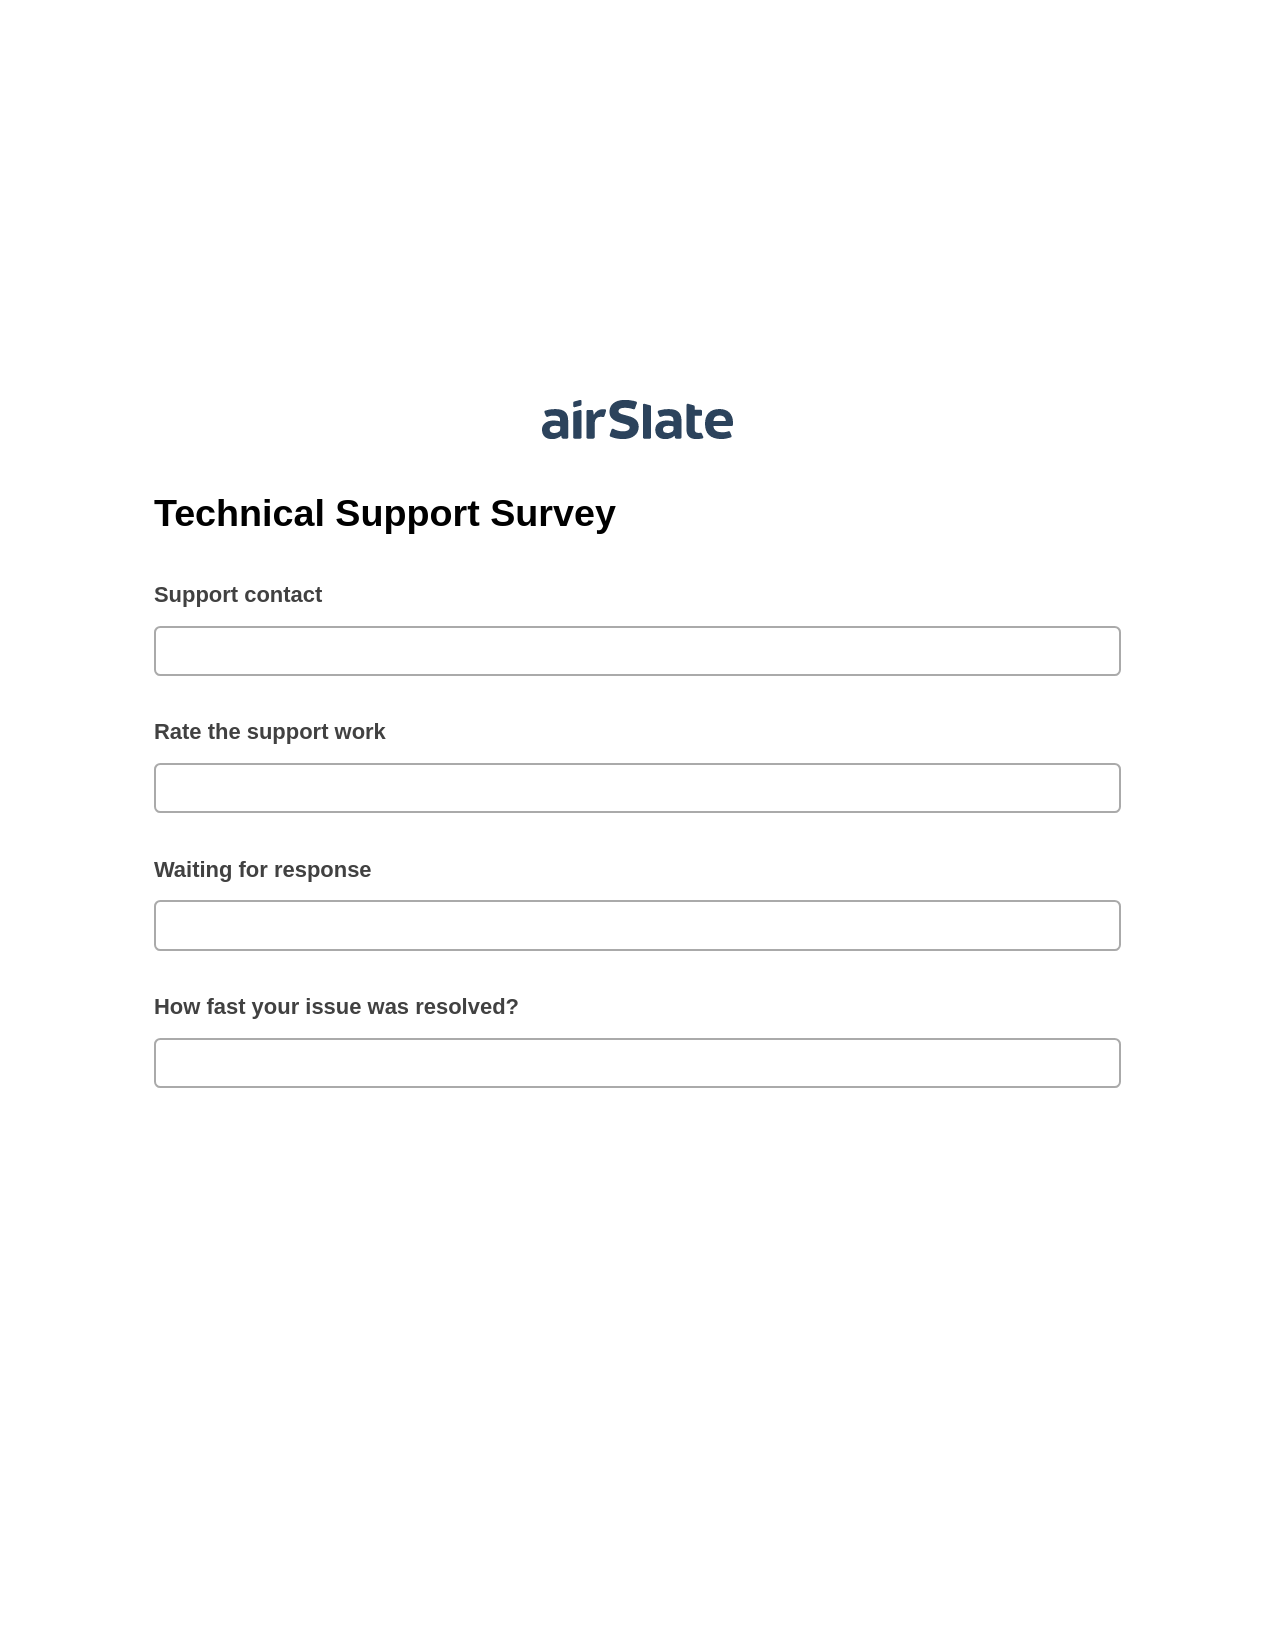 Technical Support Survey Pre-fill from Google Sheets Bot, Create slate addon, Archive to OneDrive Bot